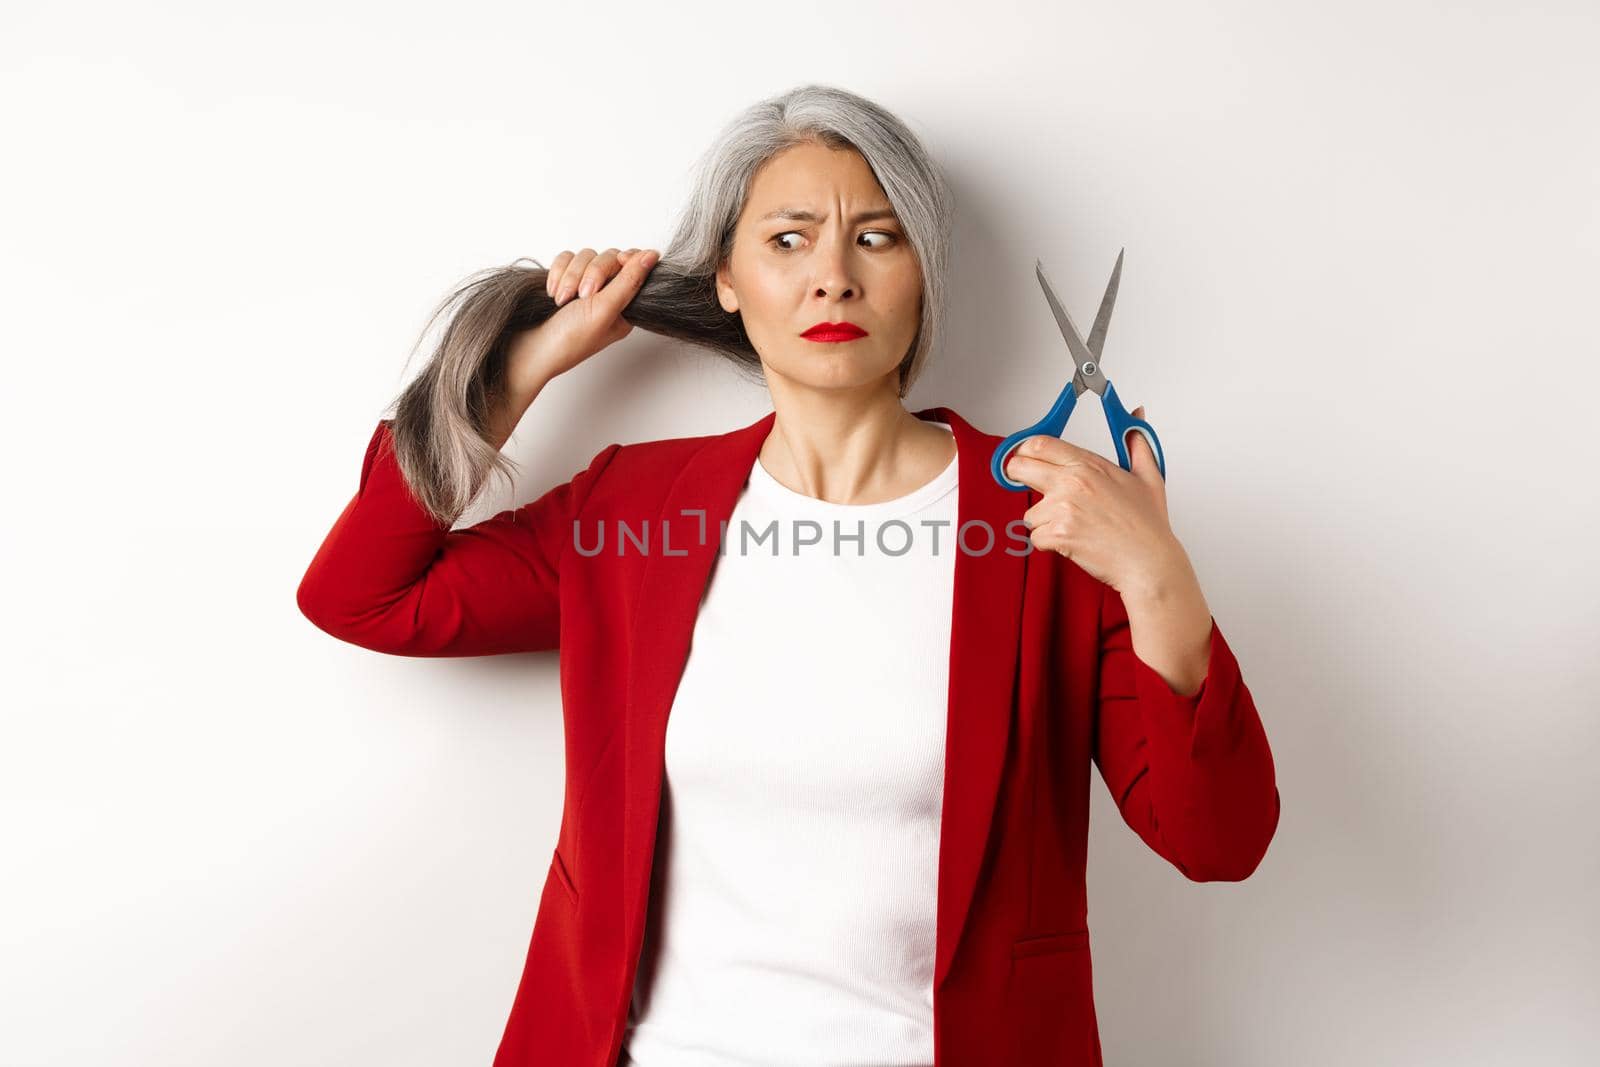 Indecisive asian woman holding scissors and looking doubtful, thinking to cut hair, changing haircut, standing over white background.